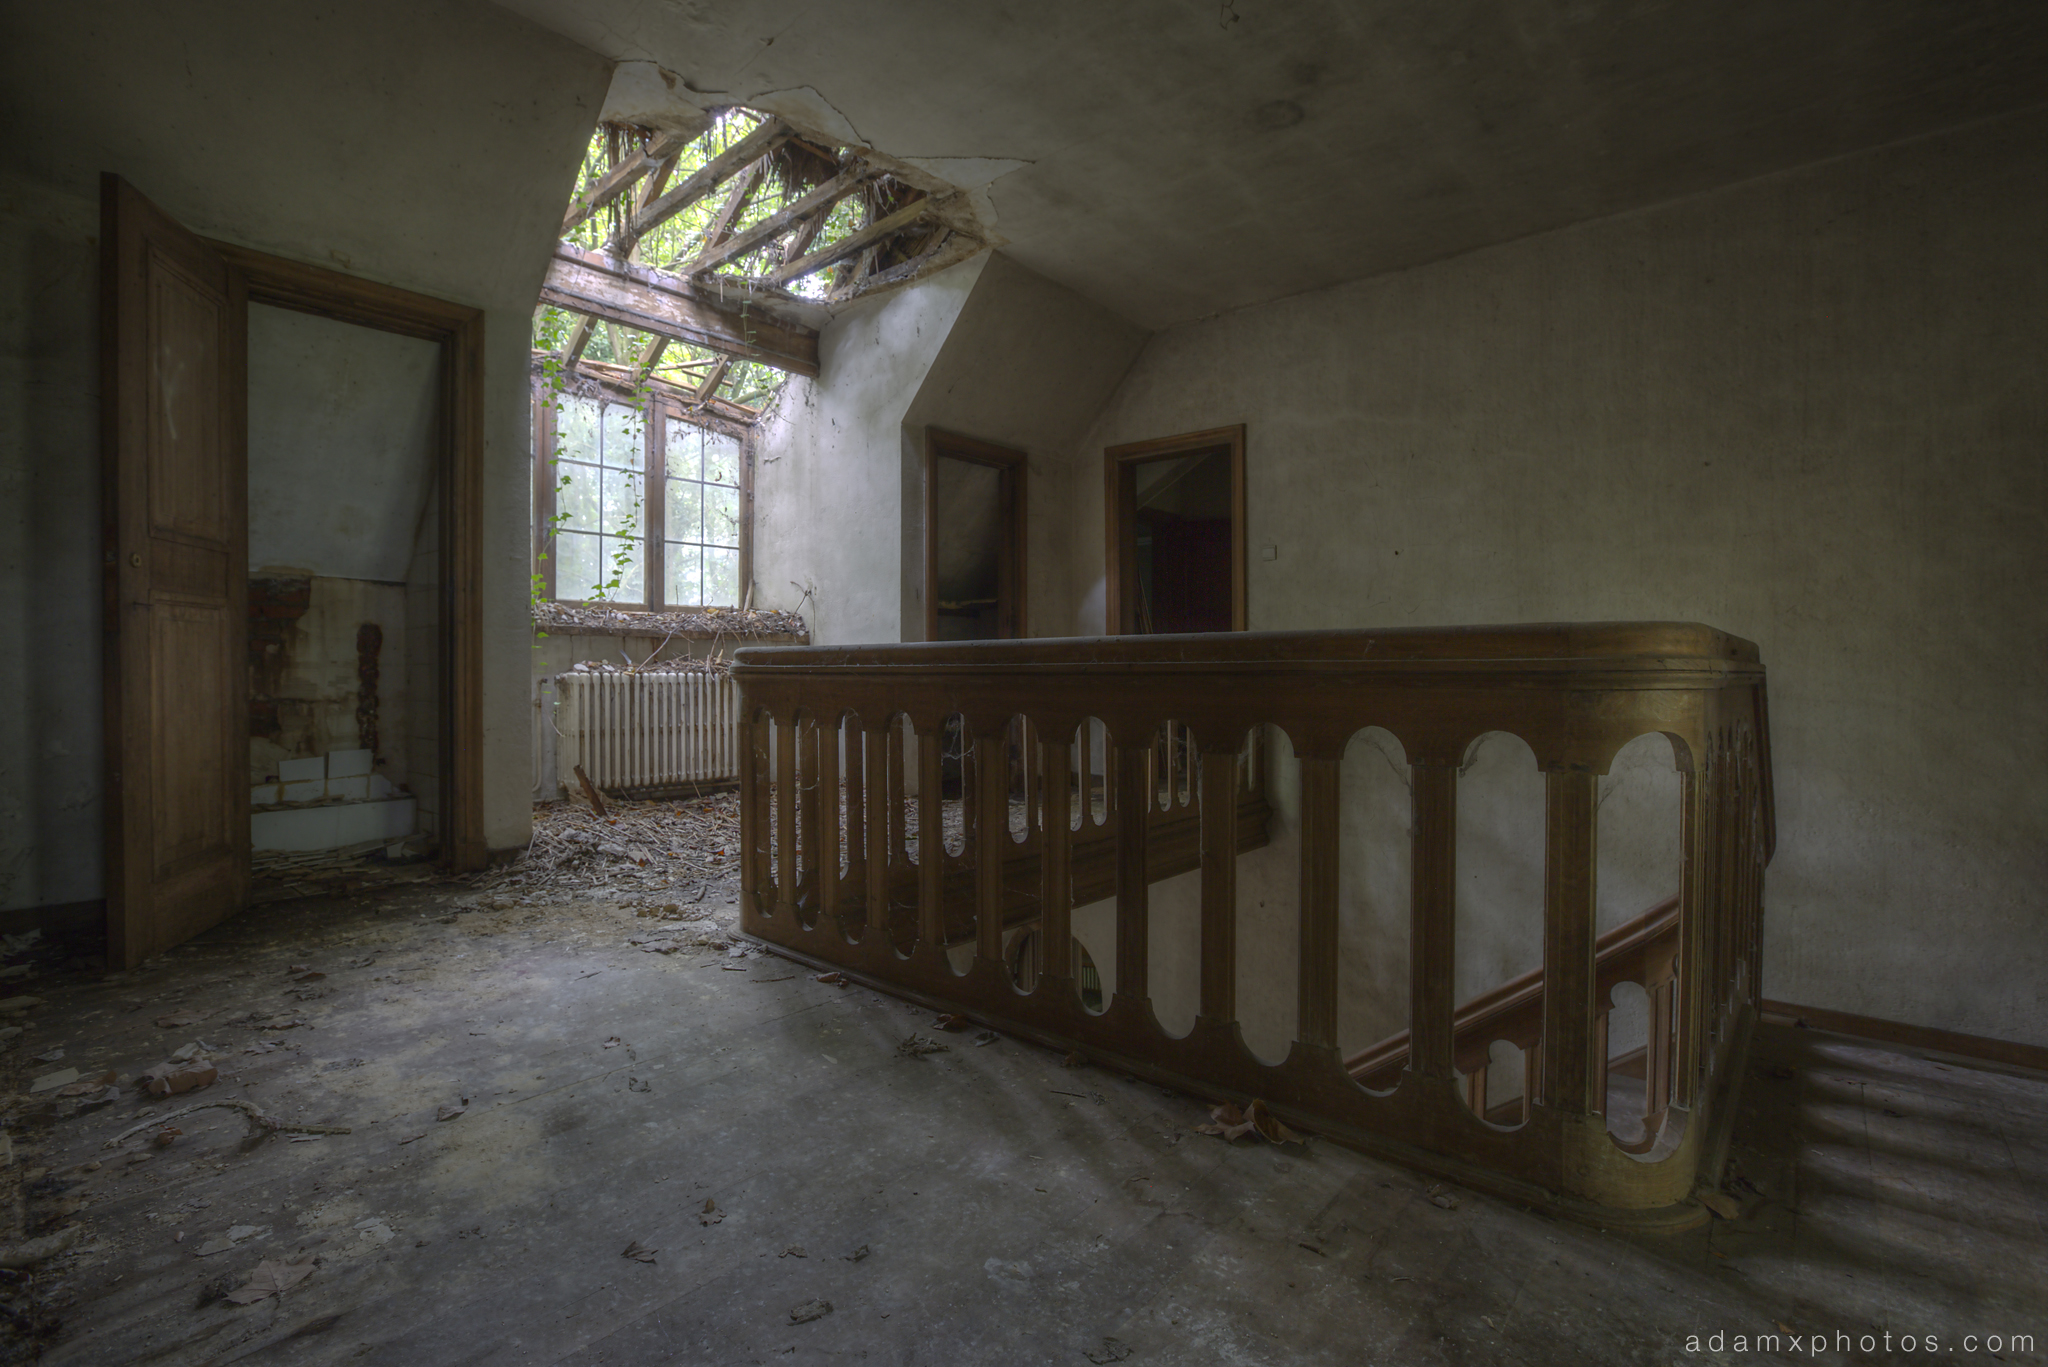 Ceiling landing greenery bannisters Adam X Urbex UE Urban Exploration Belgium Villa Maison SS House Townhouse abandoned derelict unused empty disused decay decayed decaying grimy grime collapsing overgrown